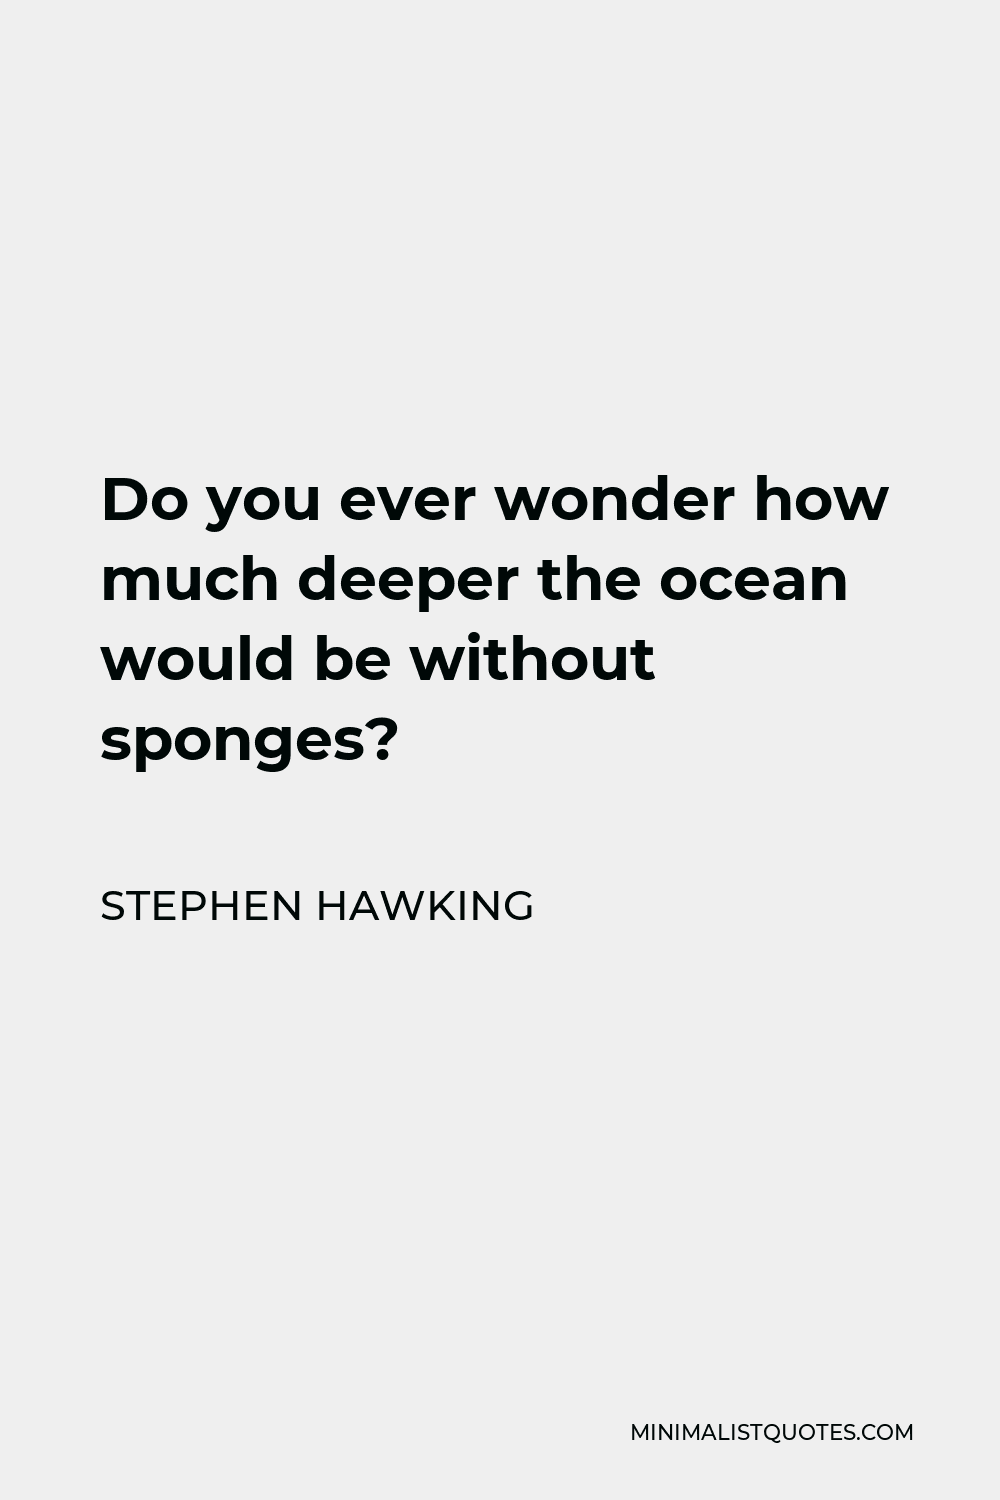 Stephen Hawking Quote - Do you ever wonder how much deeper the ocean would be without sponges?